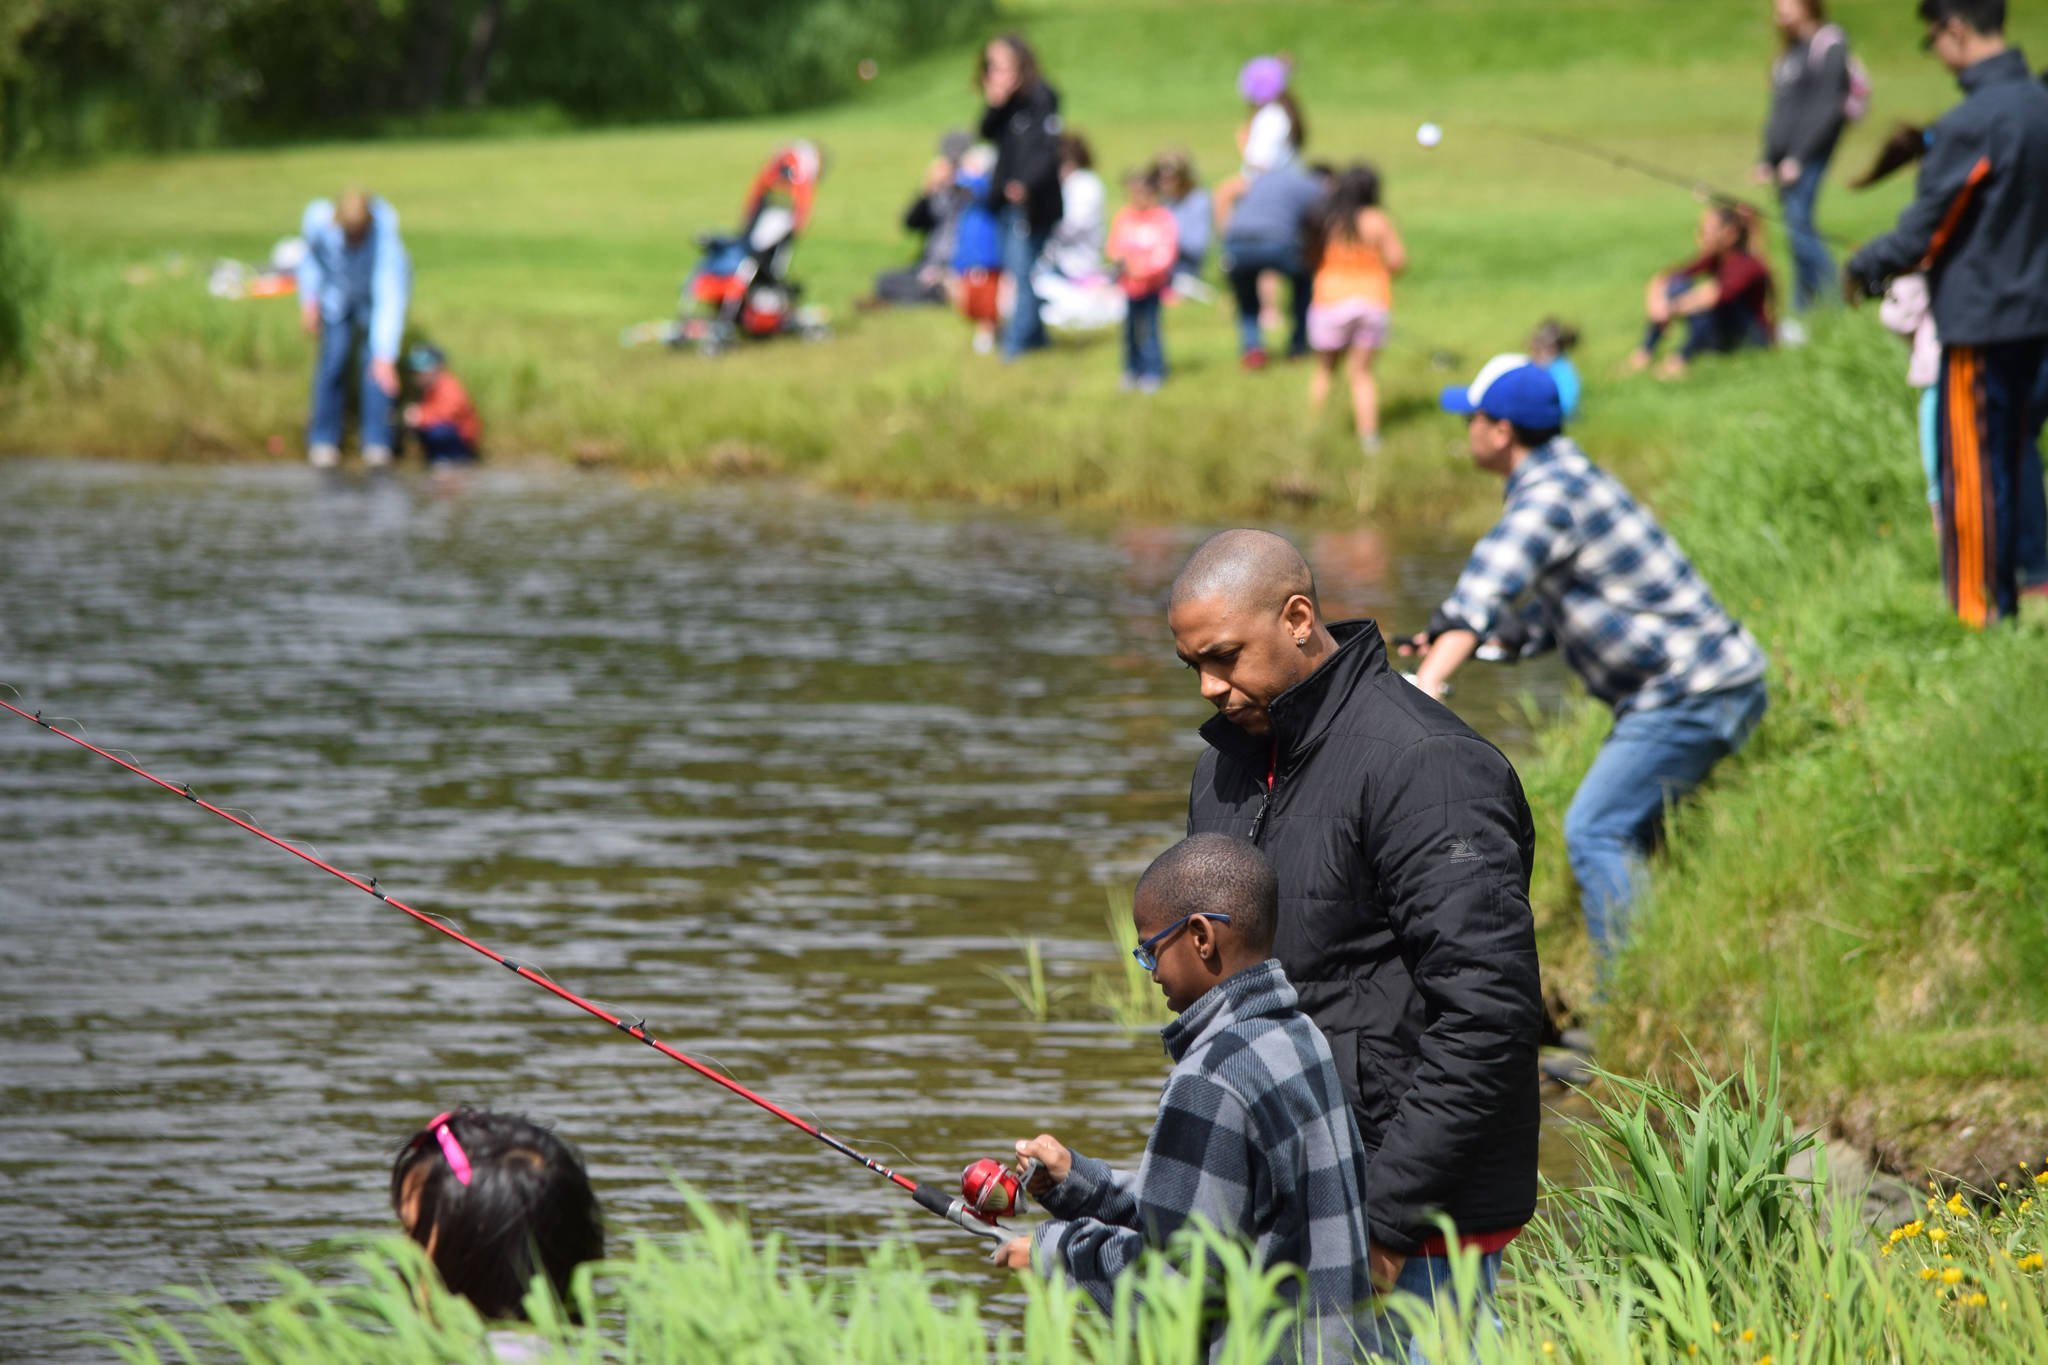 Free event will teach kids how to fish